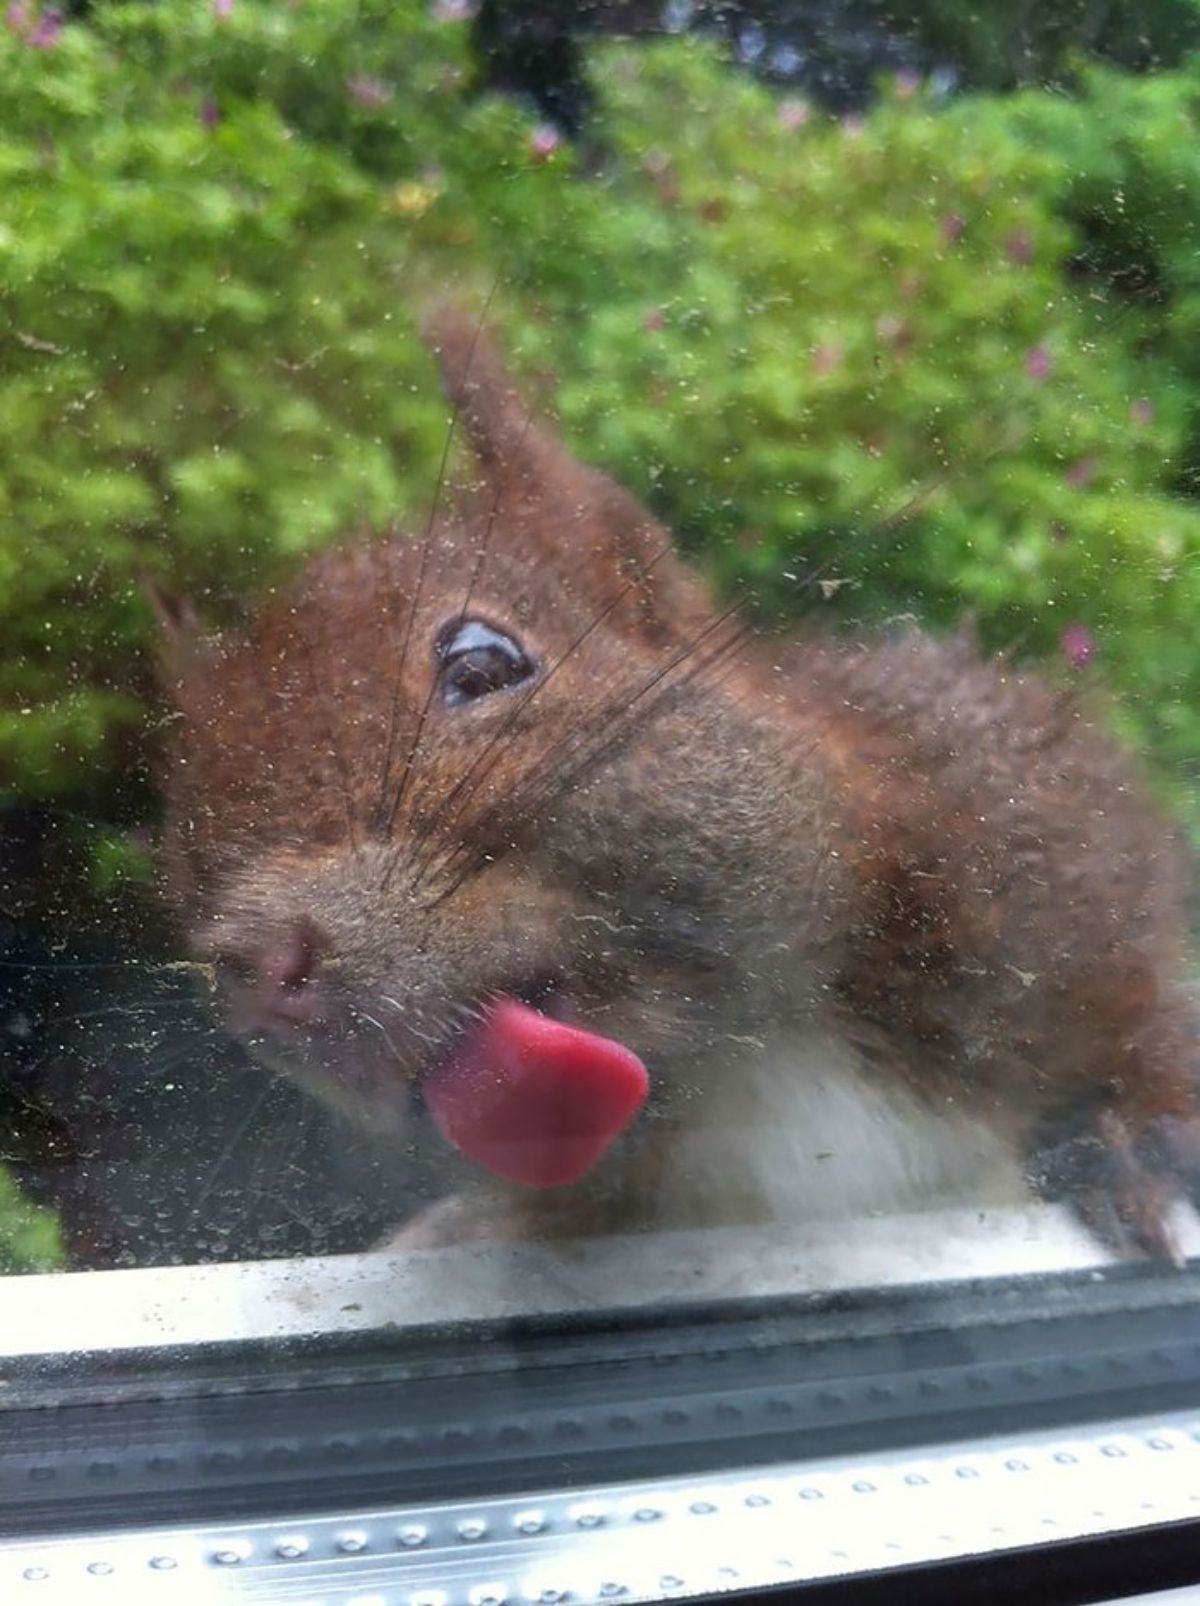 brown squirrel licking a glass window